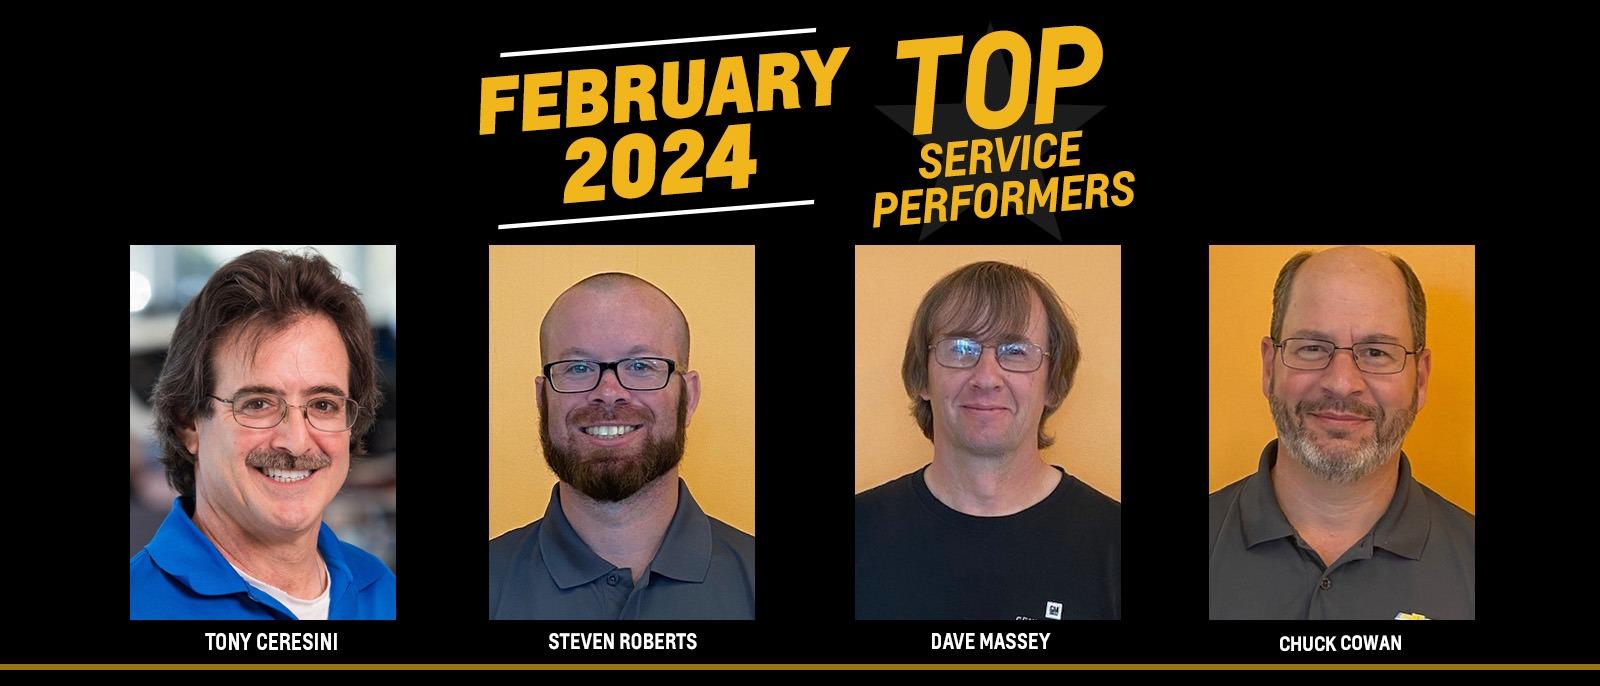 Top Service Performers